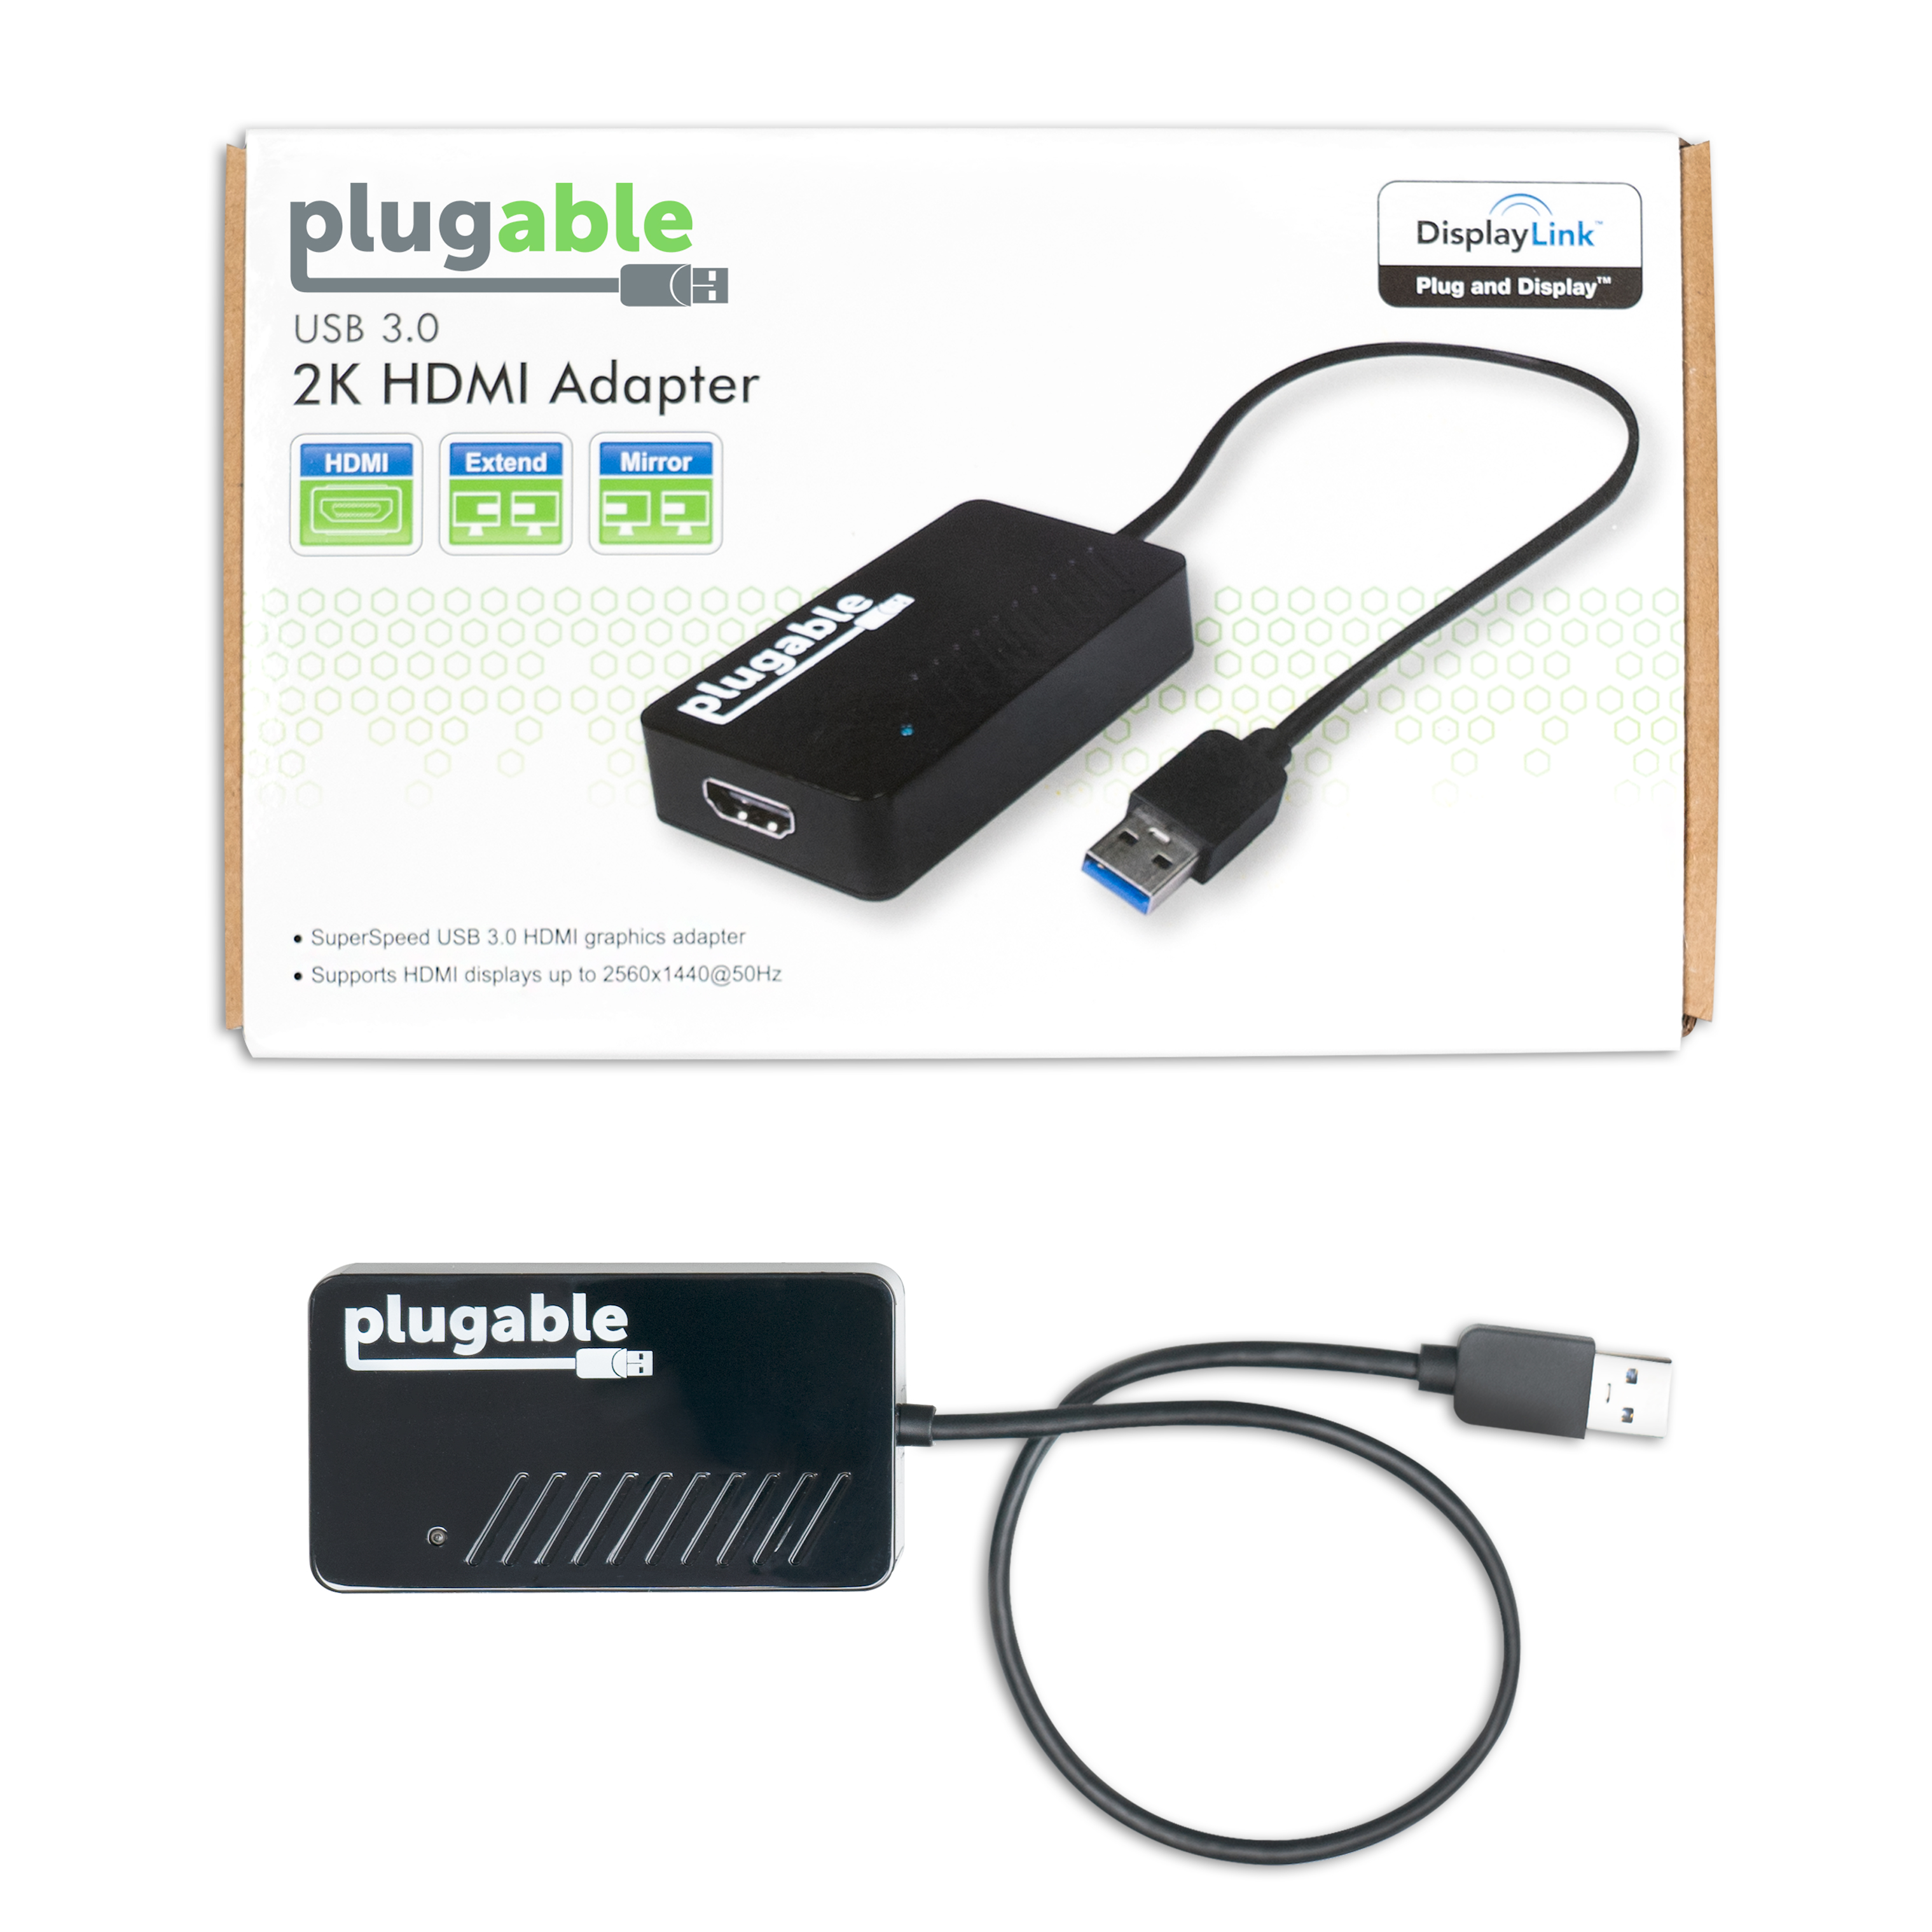 Plugable USB 3.0 to HDMI Video Graphics Adapter with Audio for Multiple Monitors up to 2560x1440 Supports Windows 11, 10, 8.1, 7, XP, and Mac - image 4 of 4